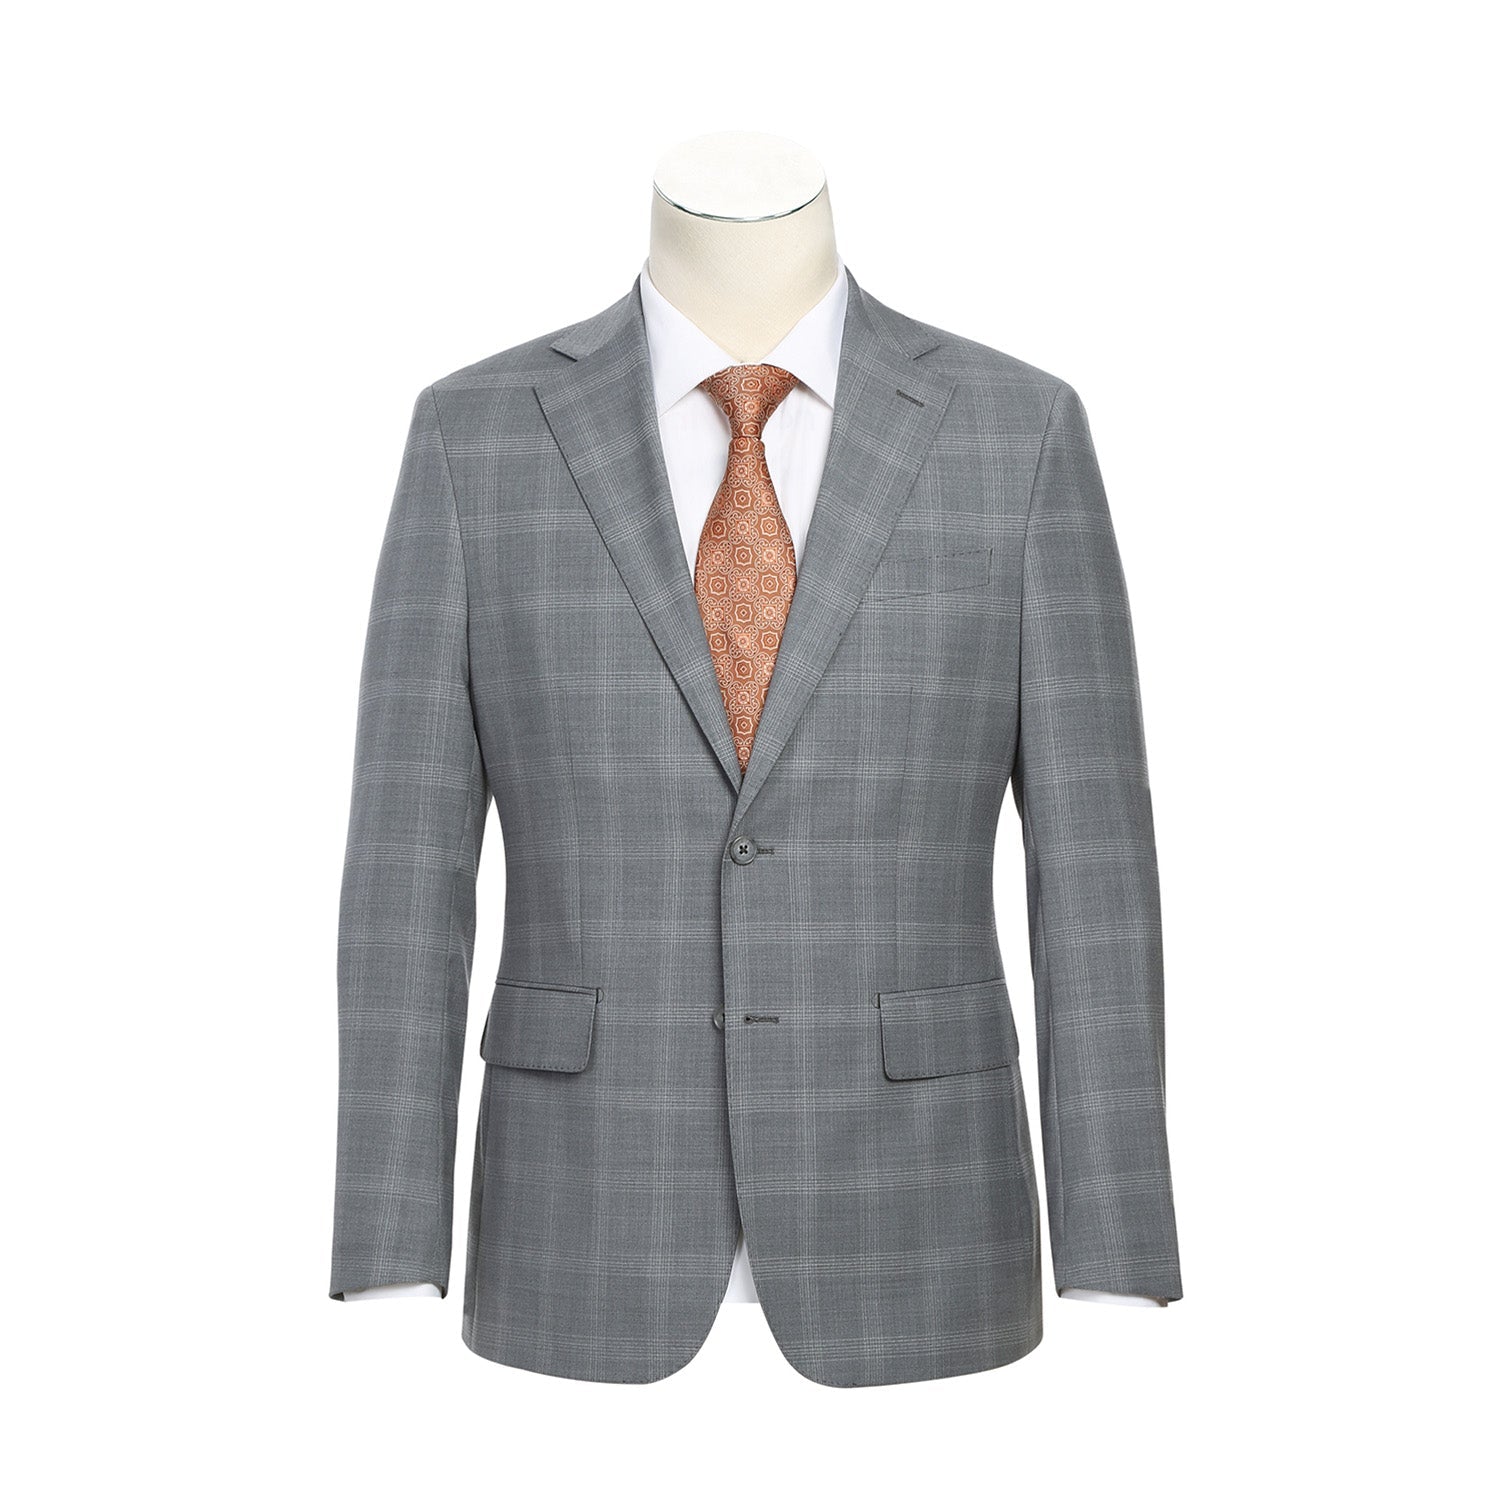 Wool Stretch Single Breasted SLIM FIT Suit in Light Grey Windowpane Check (Short, Regular, and Long Available) by English Laundry